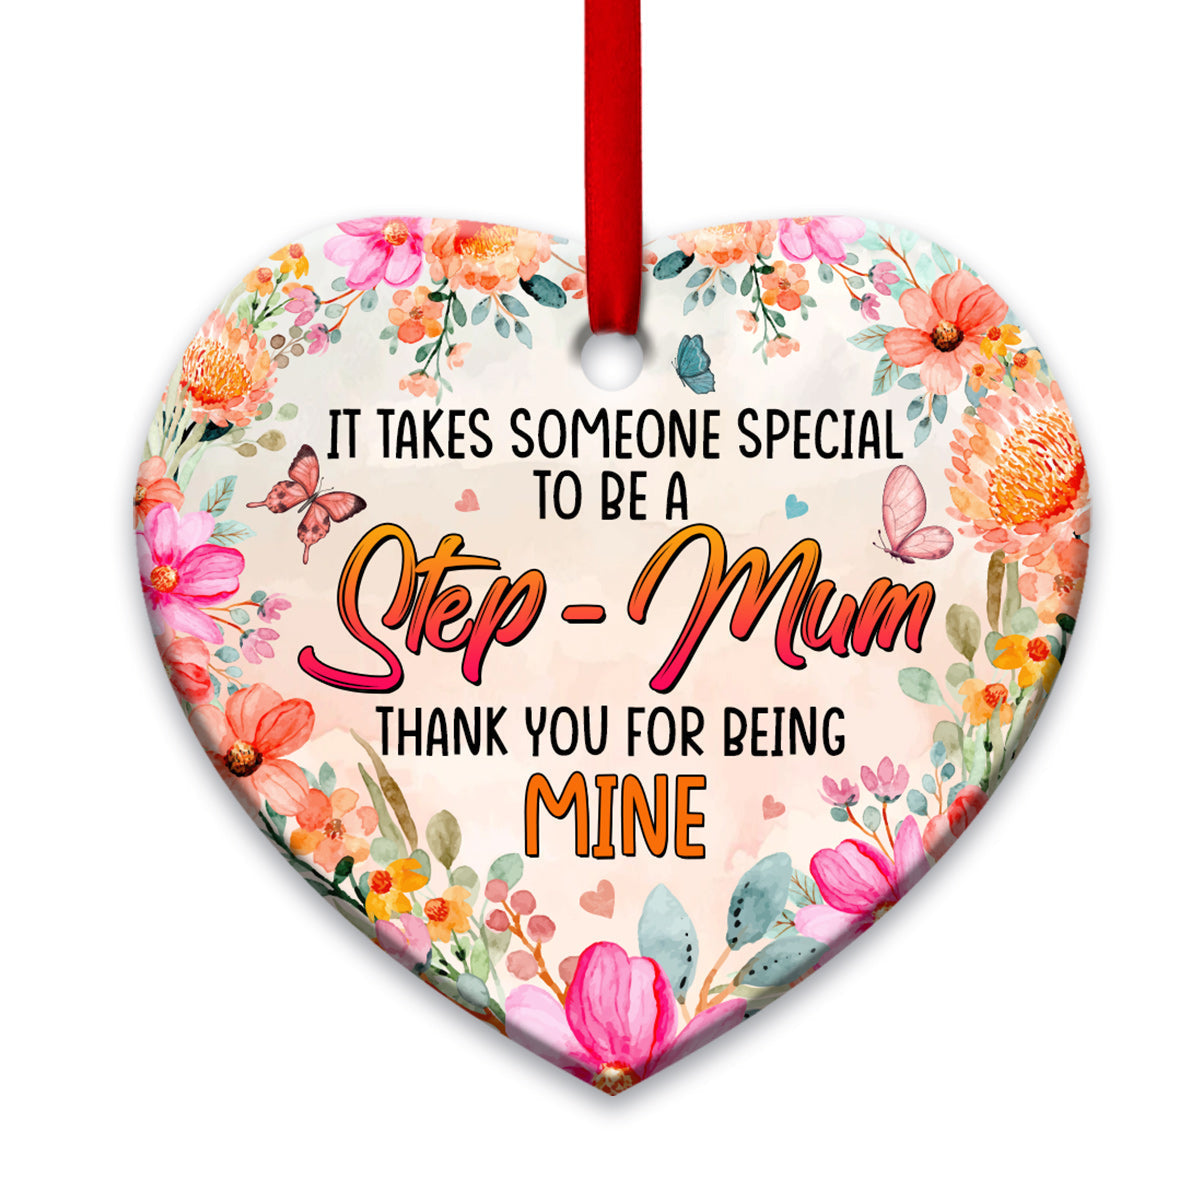 Family Mother Gift Special To Be A Step Mum - Heart Ornament - Owls Matrix LTD